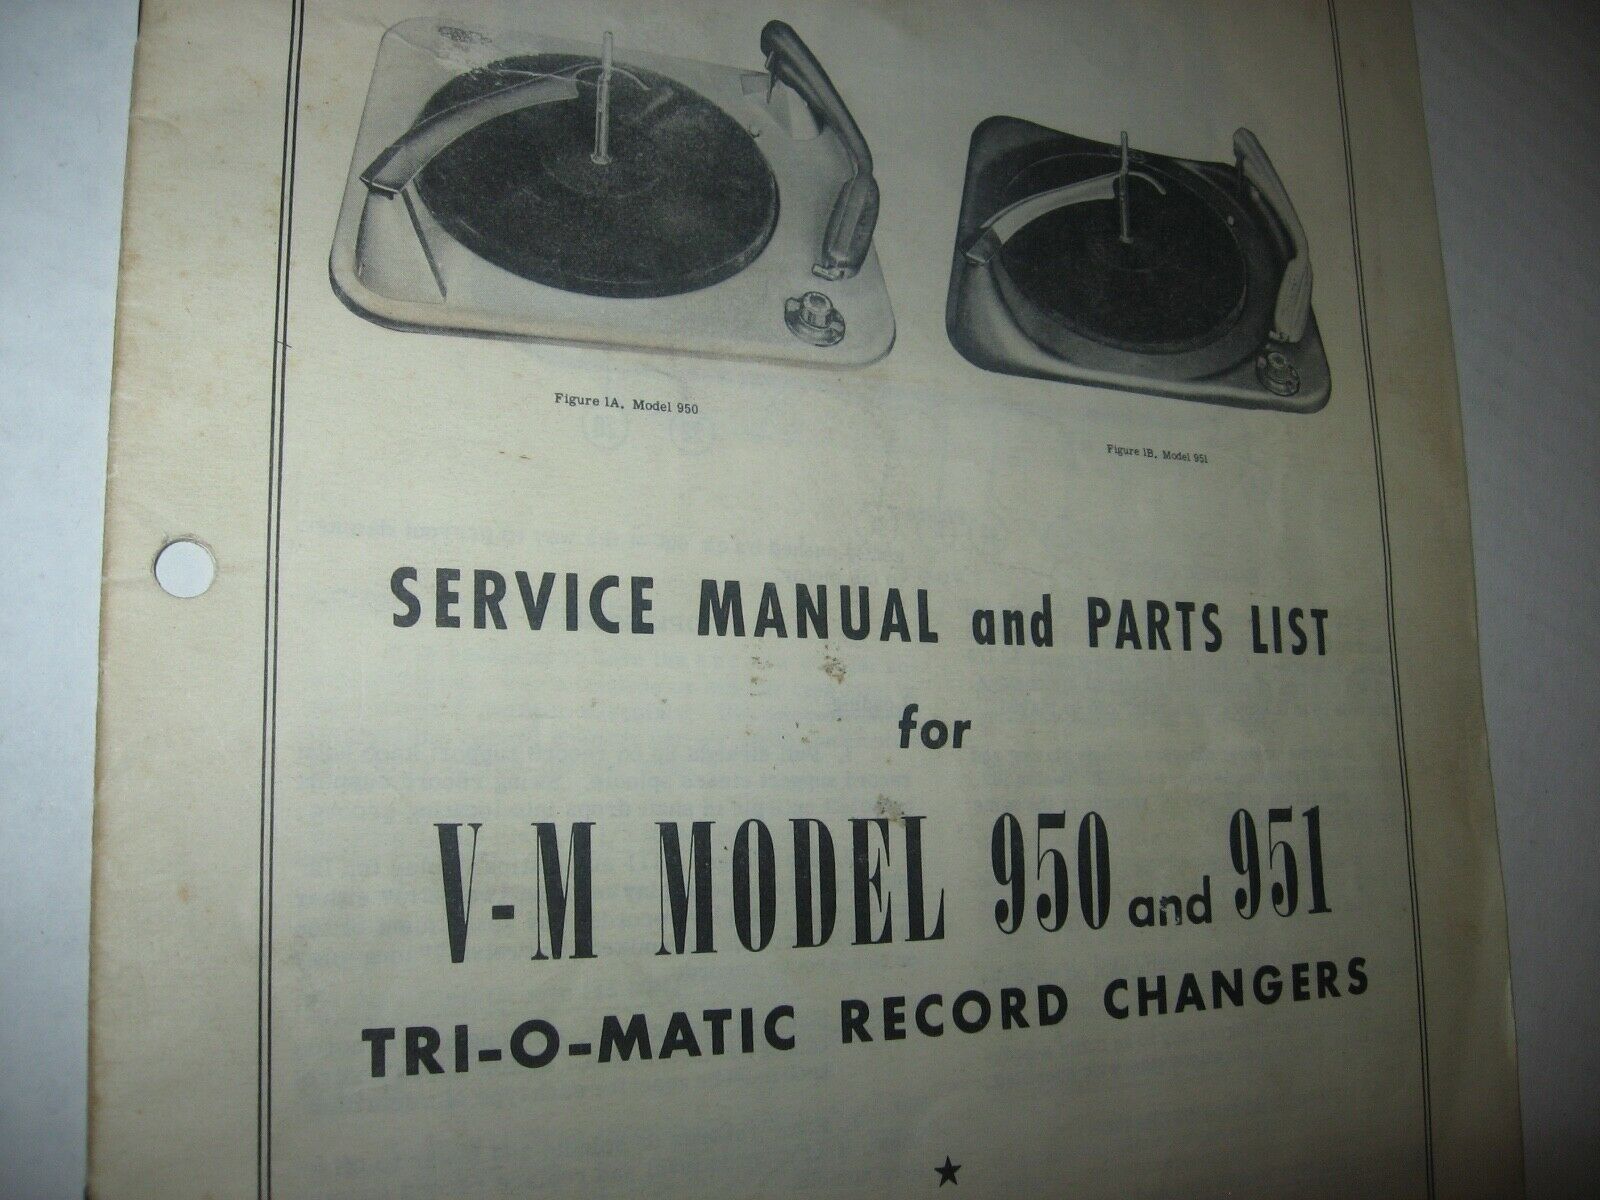 Vintage V-m Service Manual Parts List Only For Record Players 950 951 Authentic